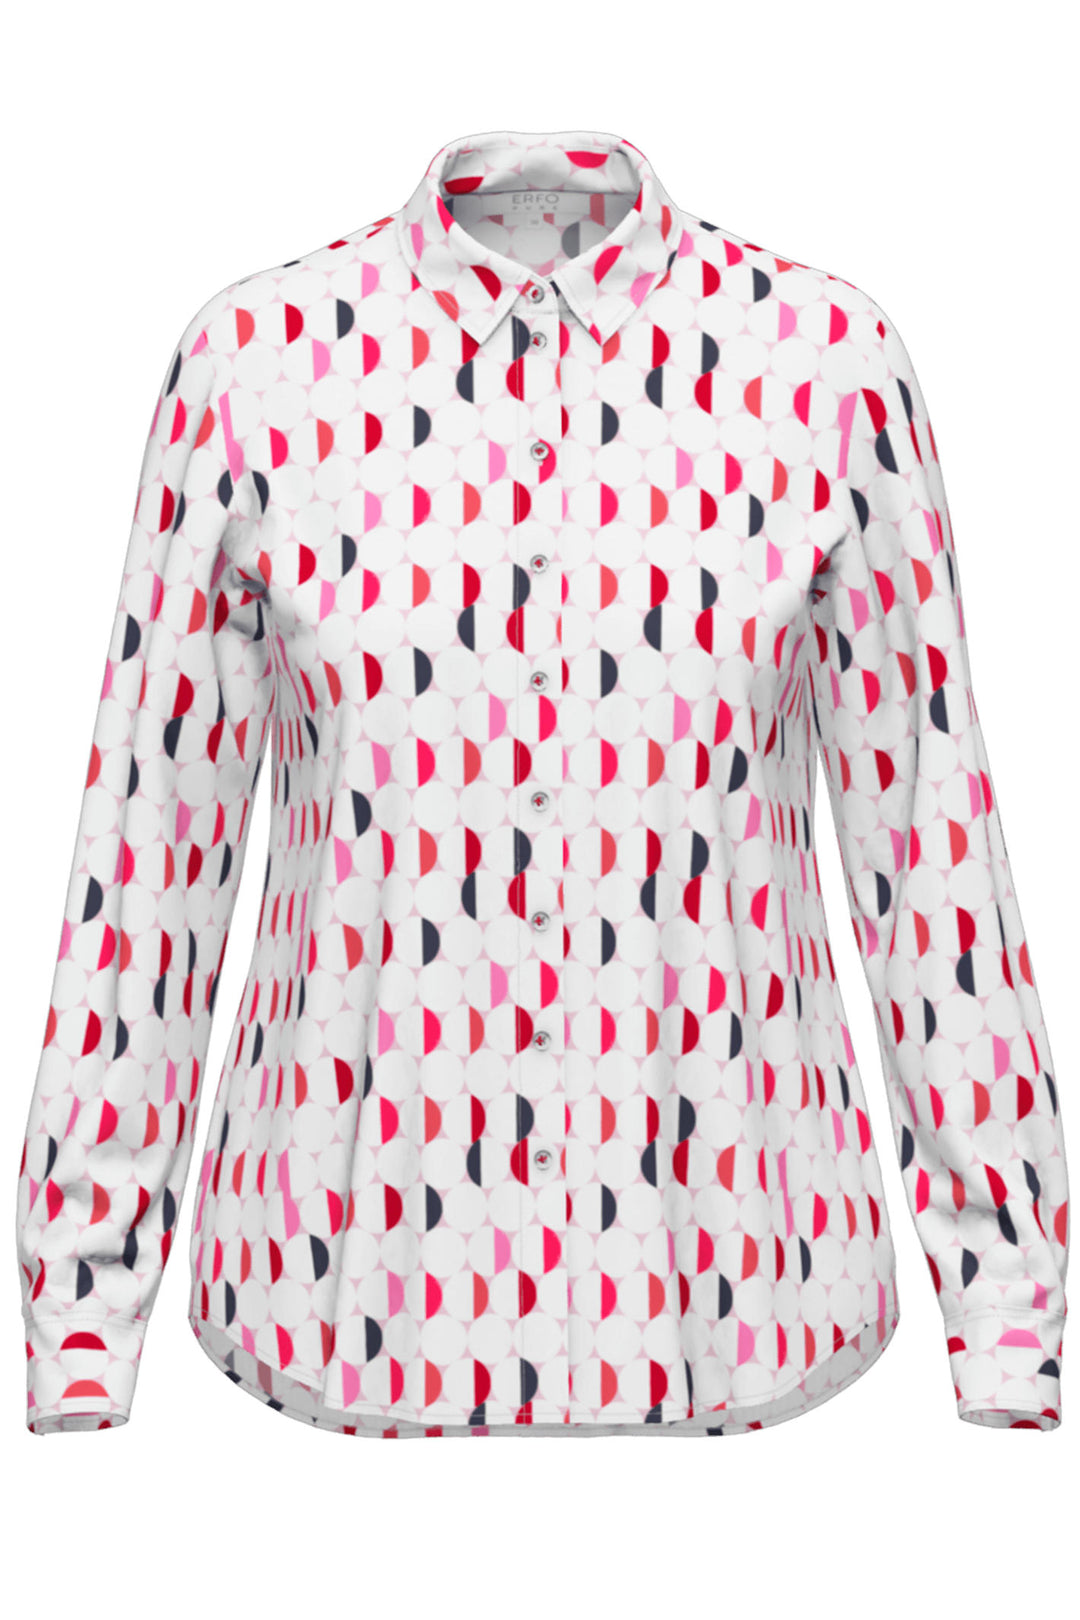 Erfo 8111007-00 Red Pink Circle Print Long Sleeve Shirt - Shirley Allum Boutique